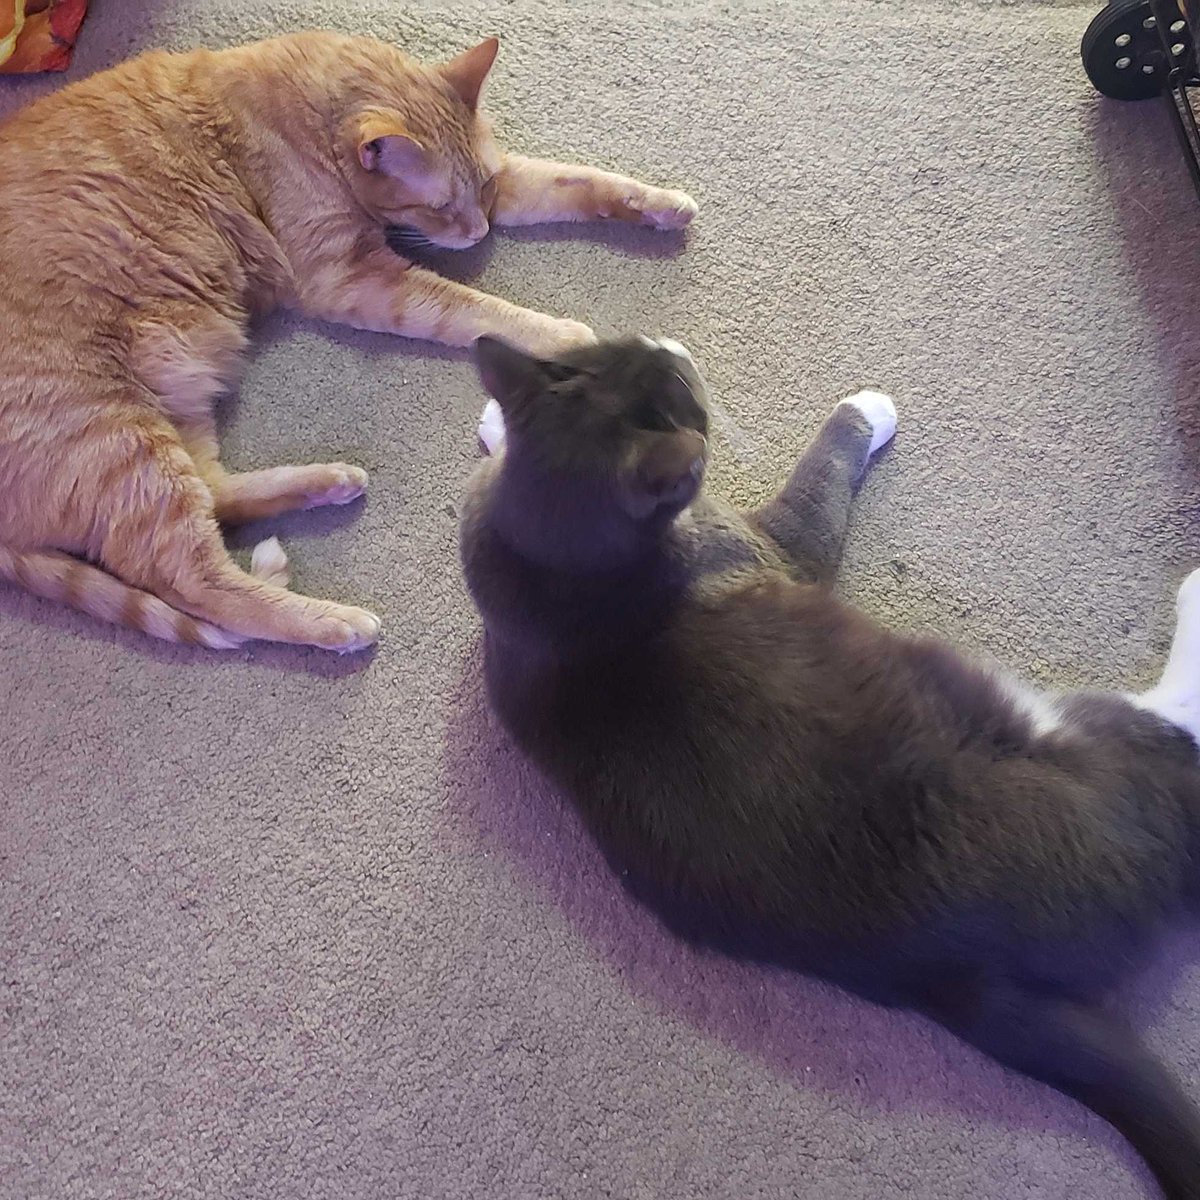 Say hi to Ken (Orange) & Anji (Tux) from the  @Warcraft QA, Encounters Team. "Both formerly feral, love to wrestle all time- both are named after fighting game characters and they certainly live up to their monikers everyday. "(Round two...FIGHT!)